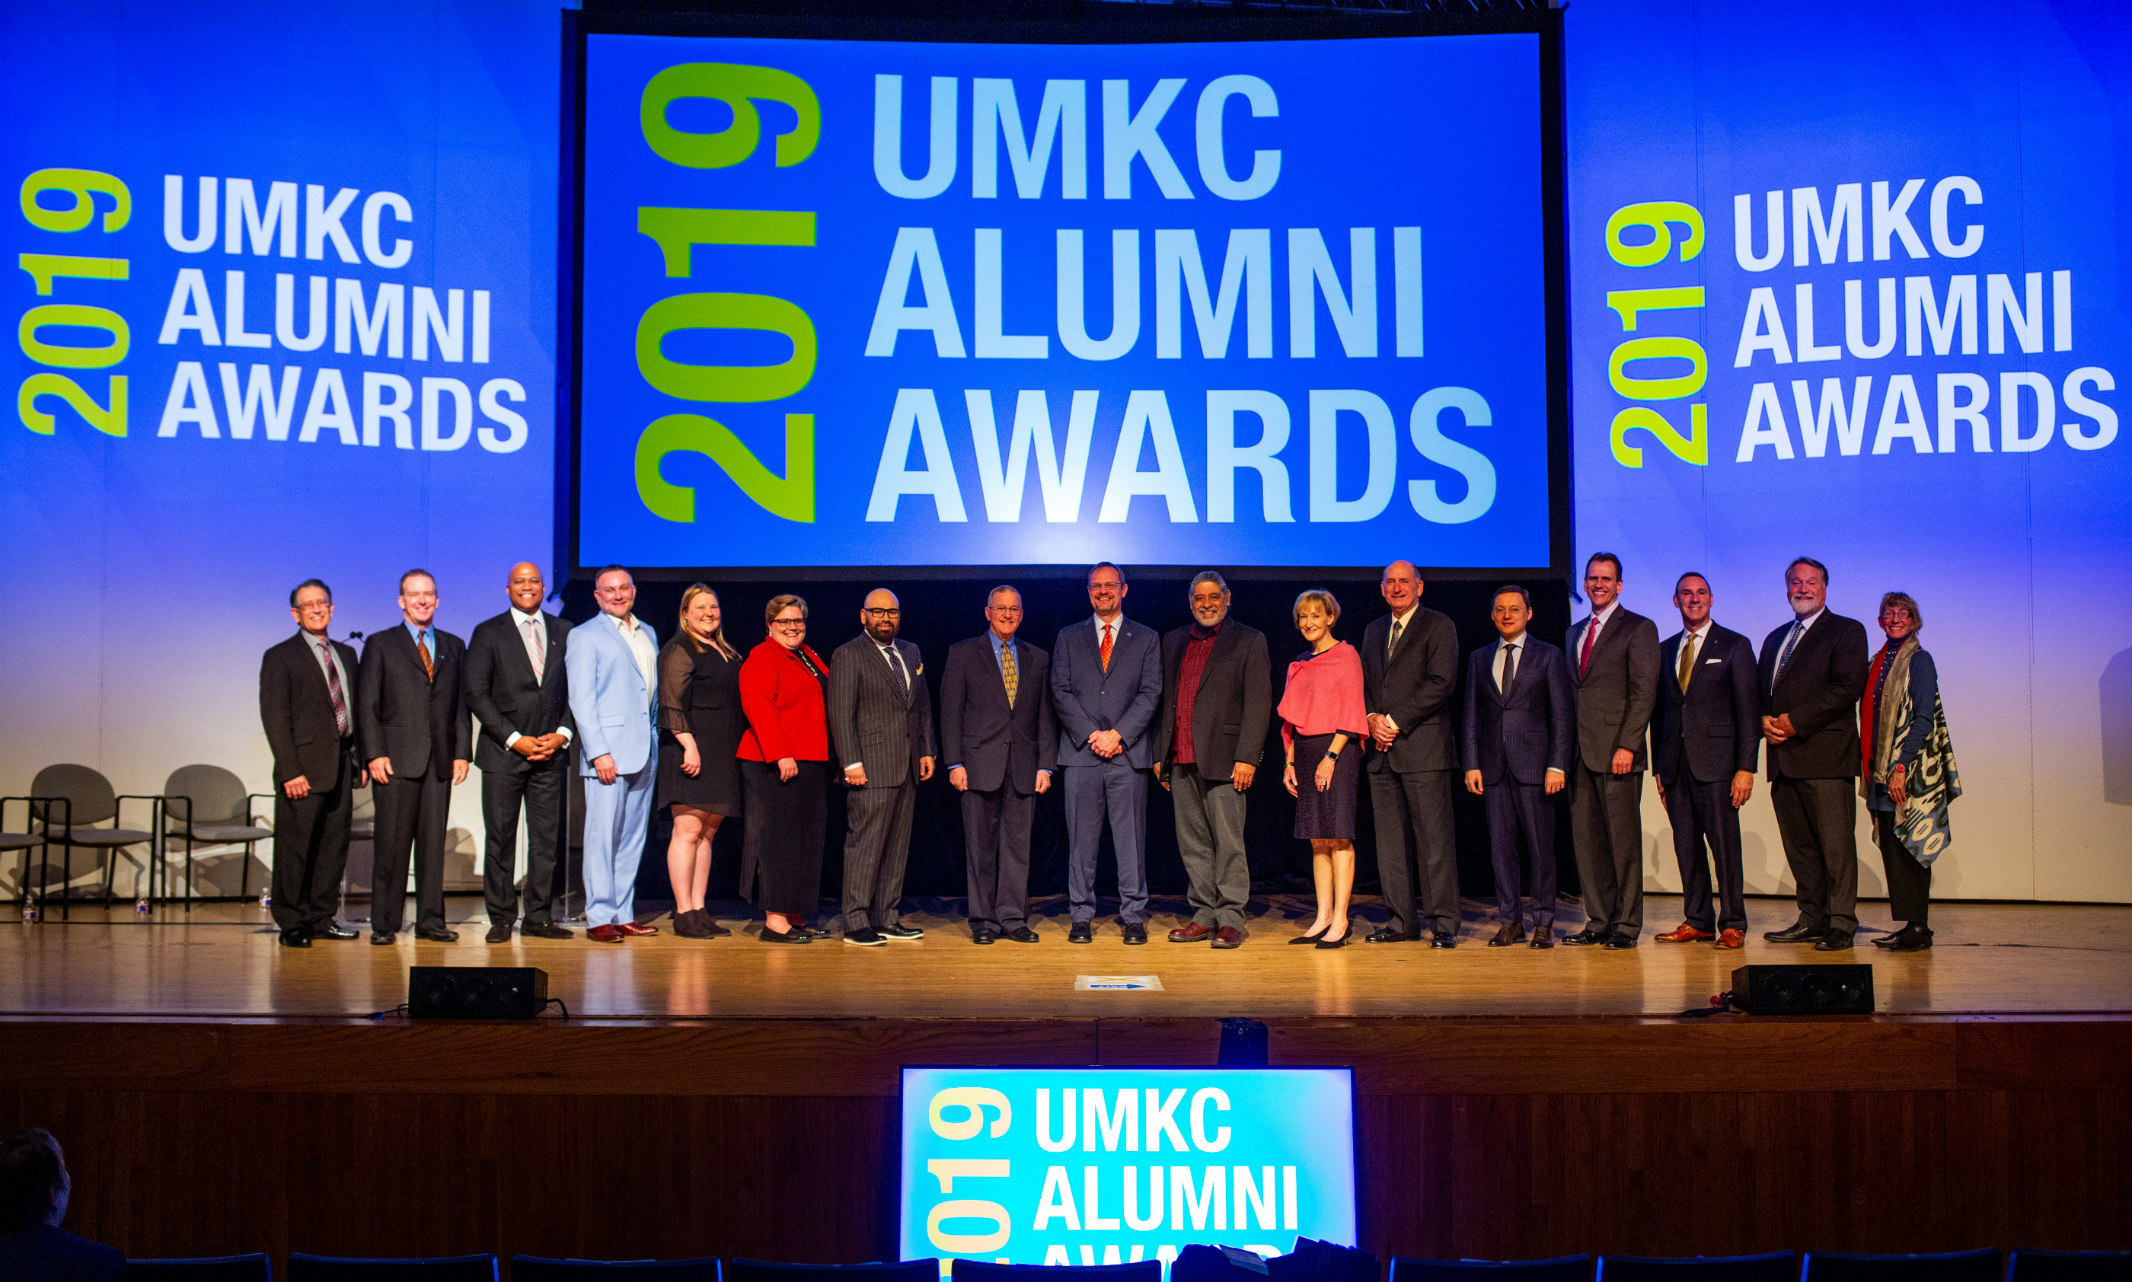 The 2019 UMKC Alumni Award winners pose for a group photo at the March 15 celebration event.